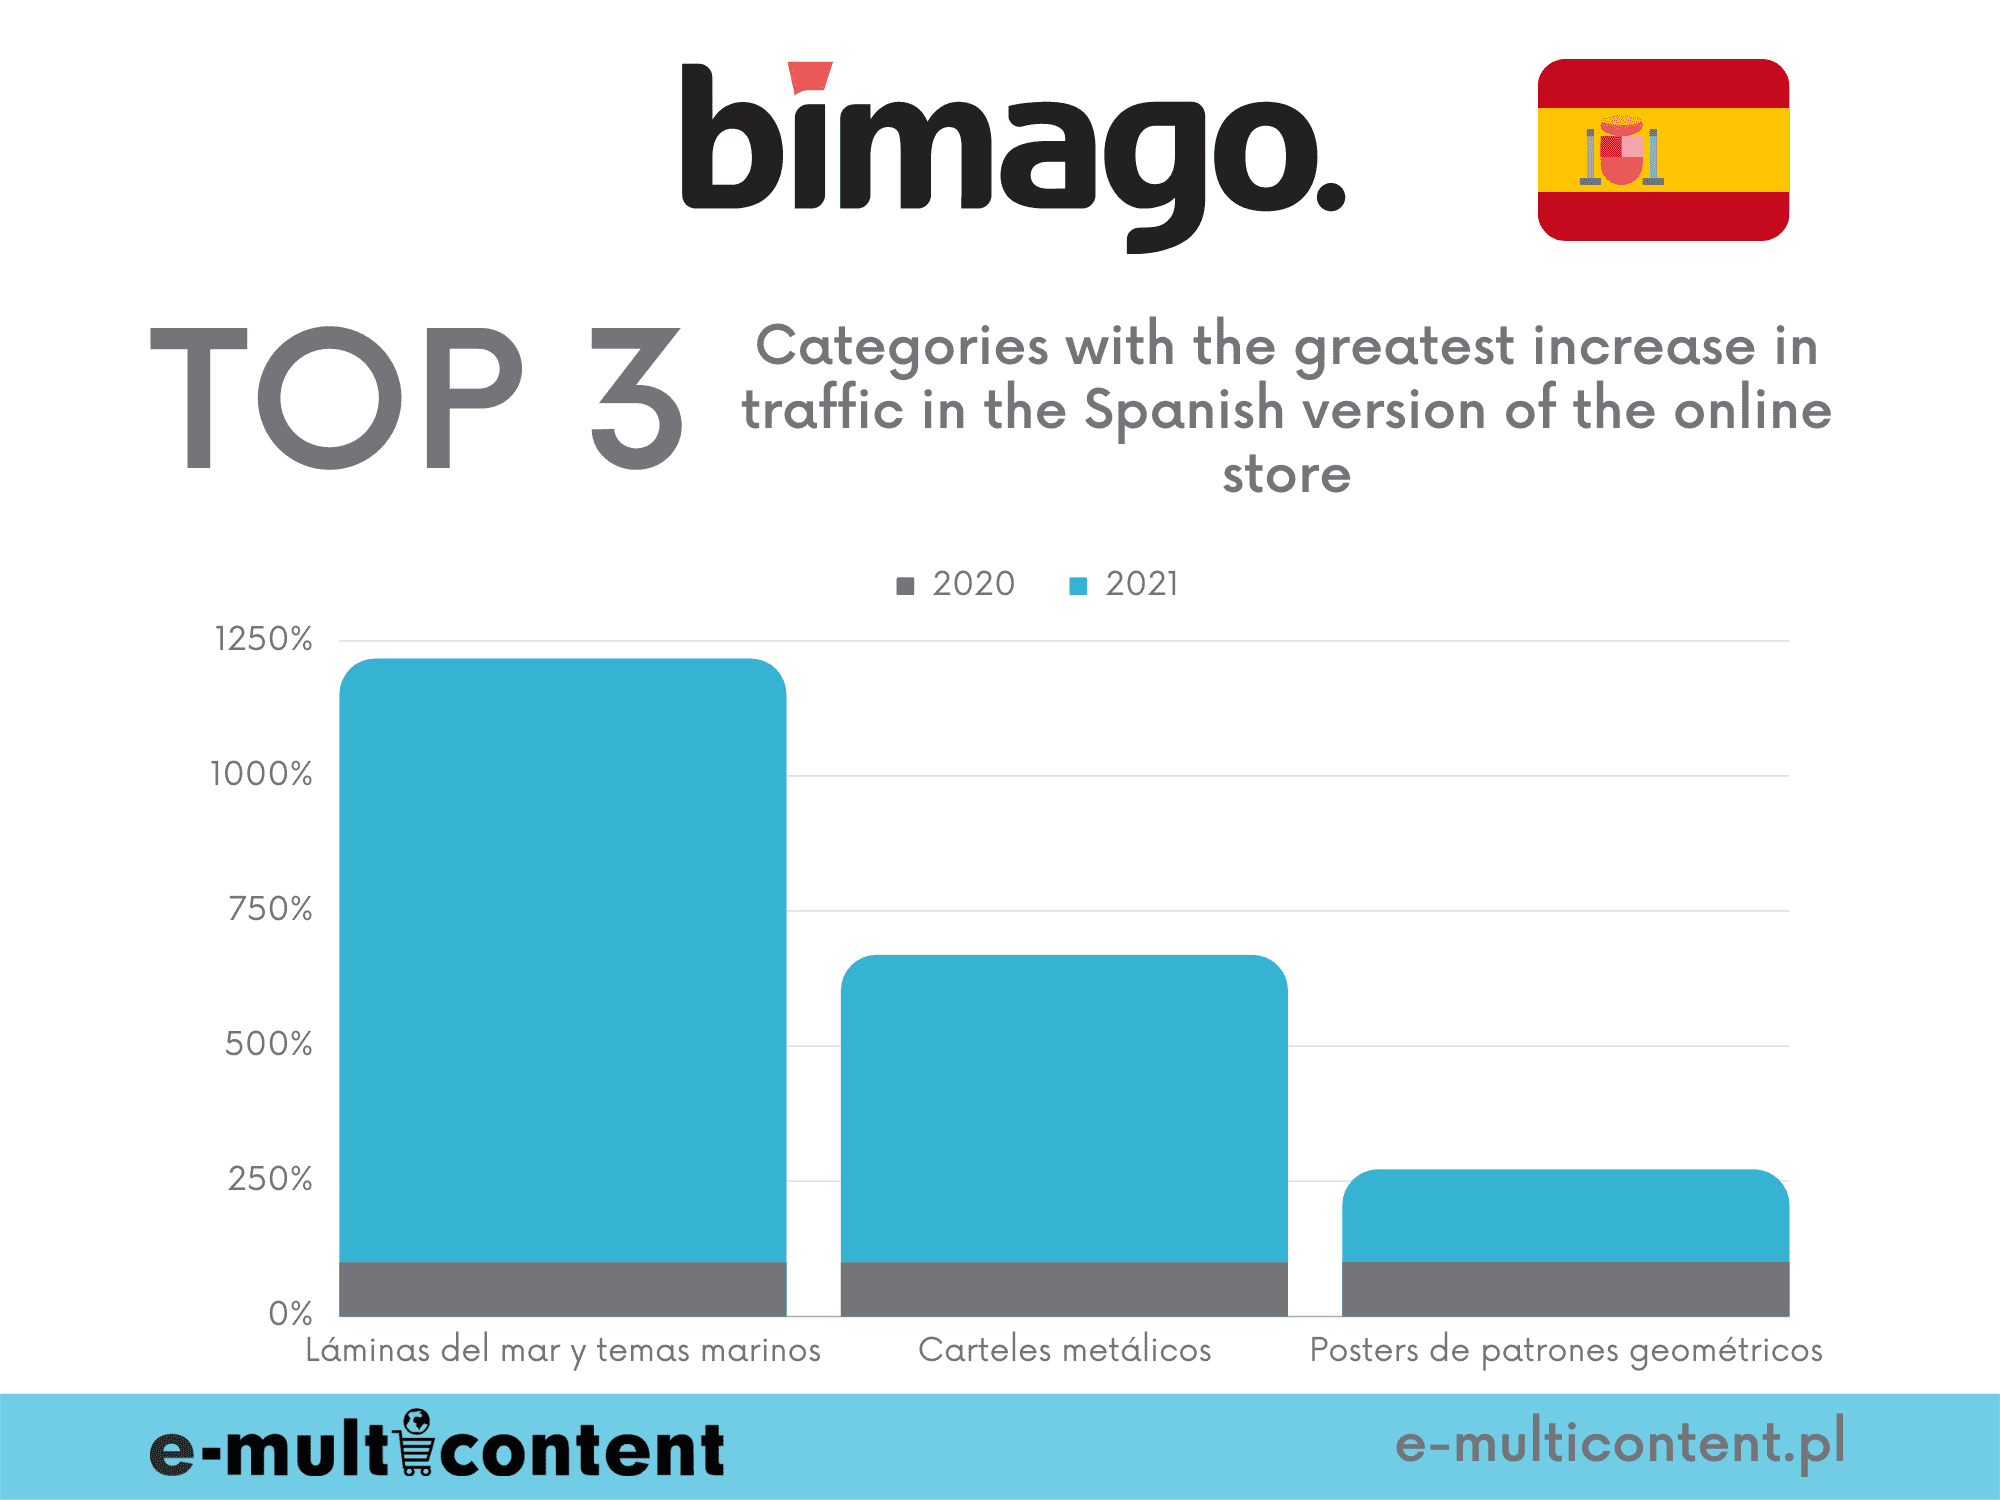 Categories with the highest increase in traffic - bimago.es